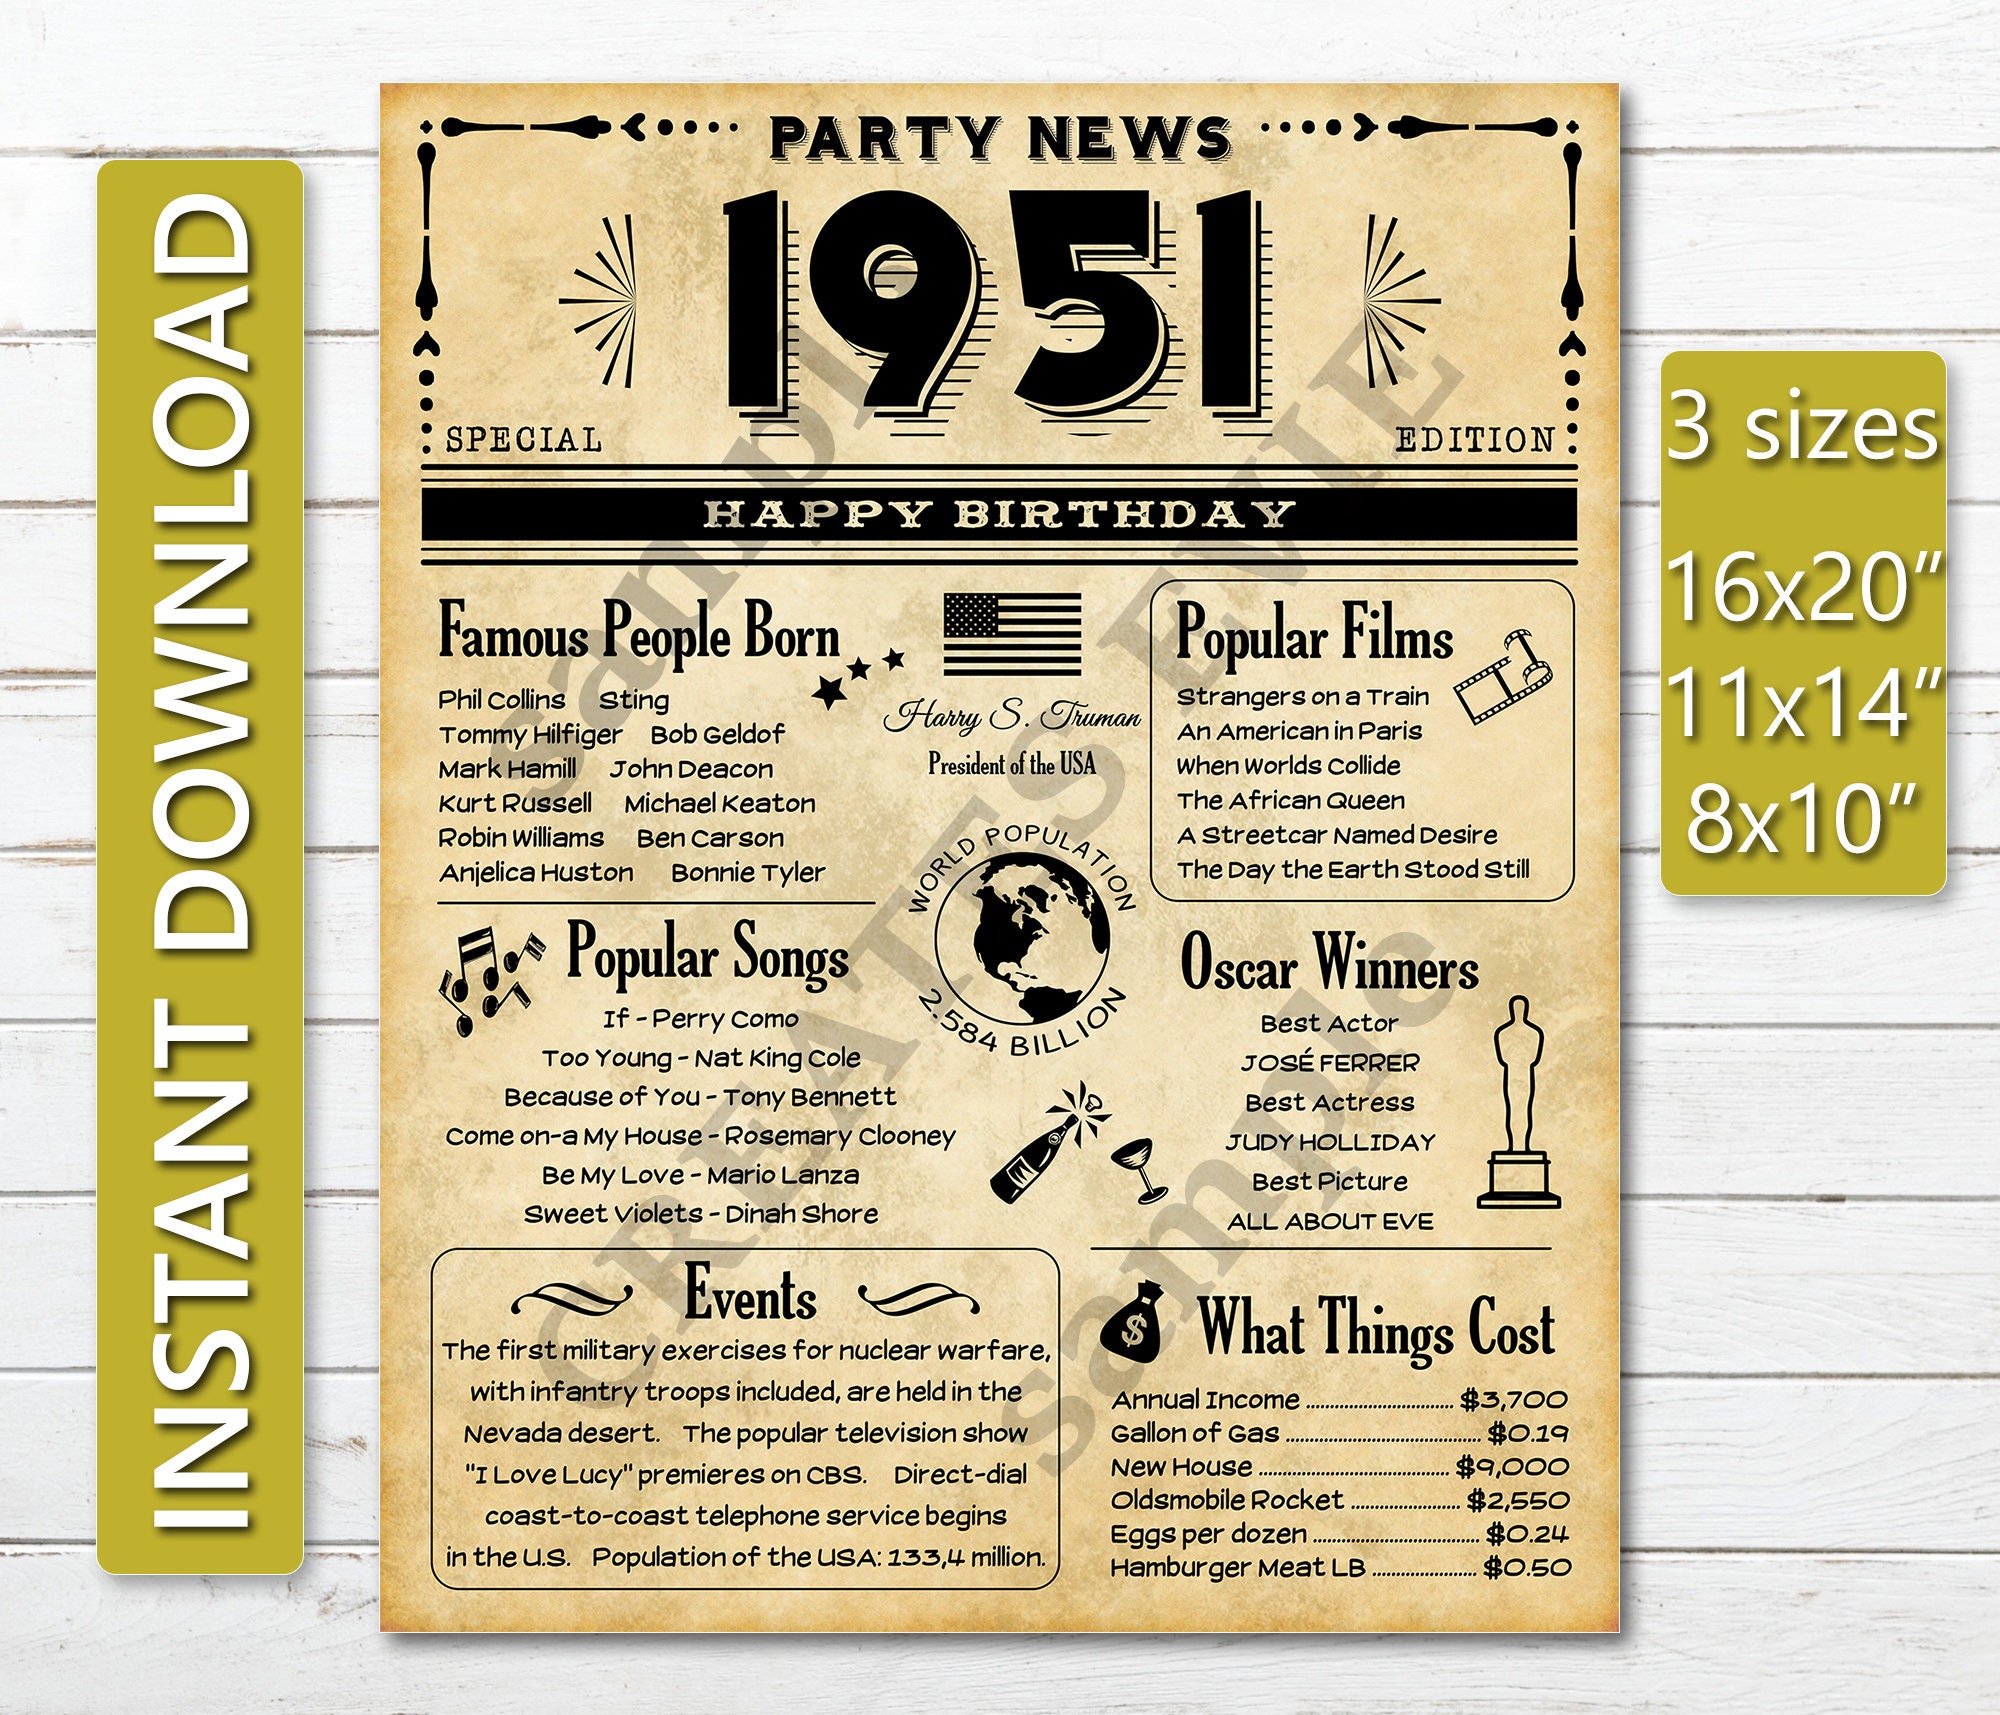 70-years-ago-back-in-1951-printable-old-newspaper-style-poster-etsy